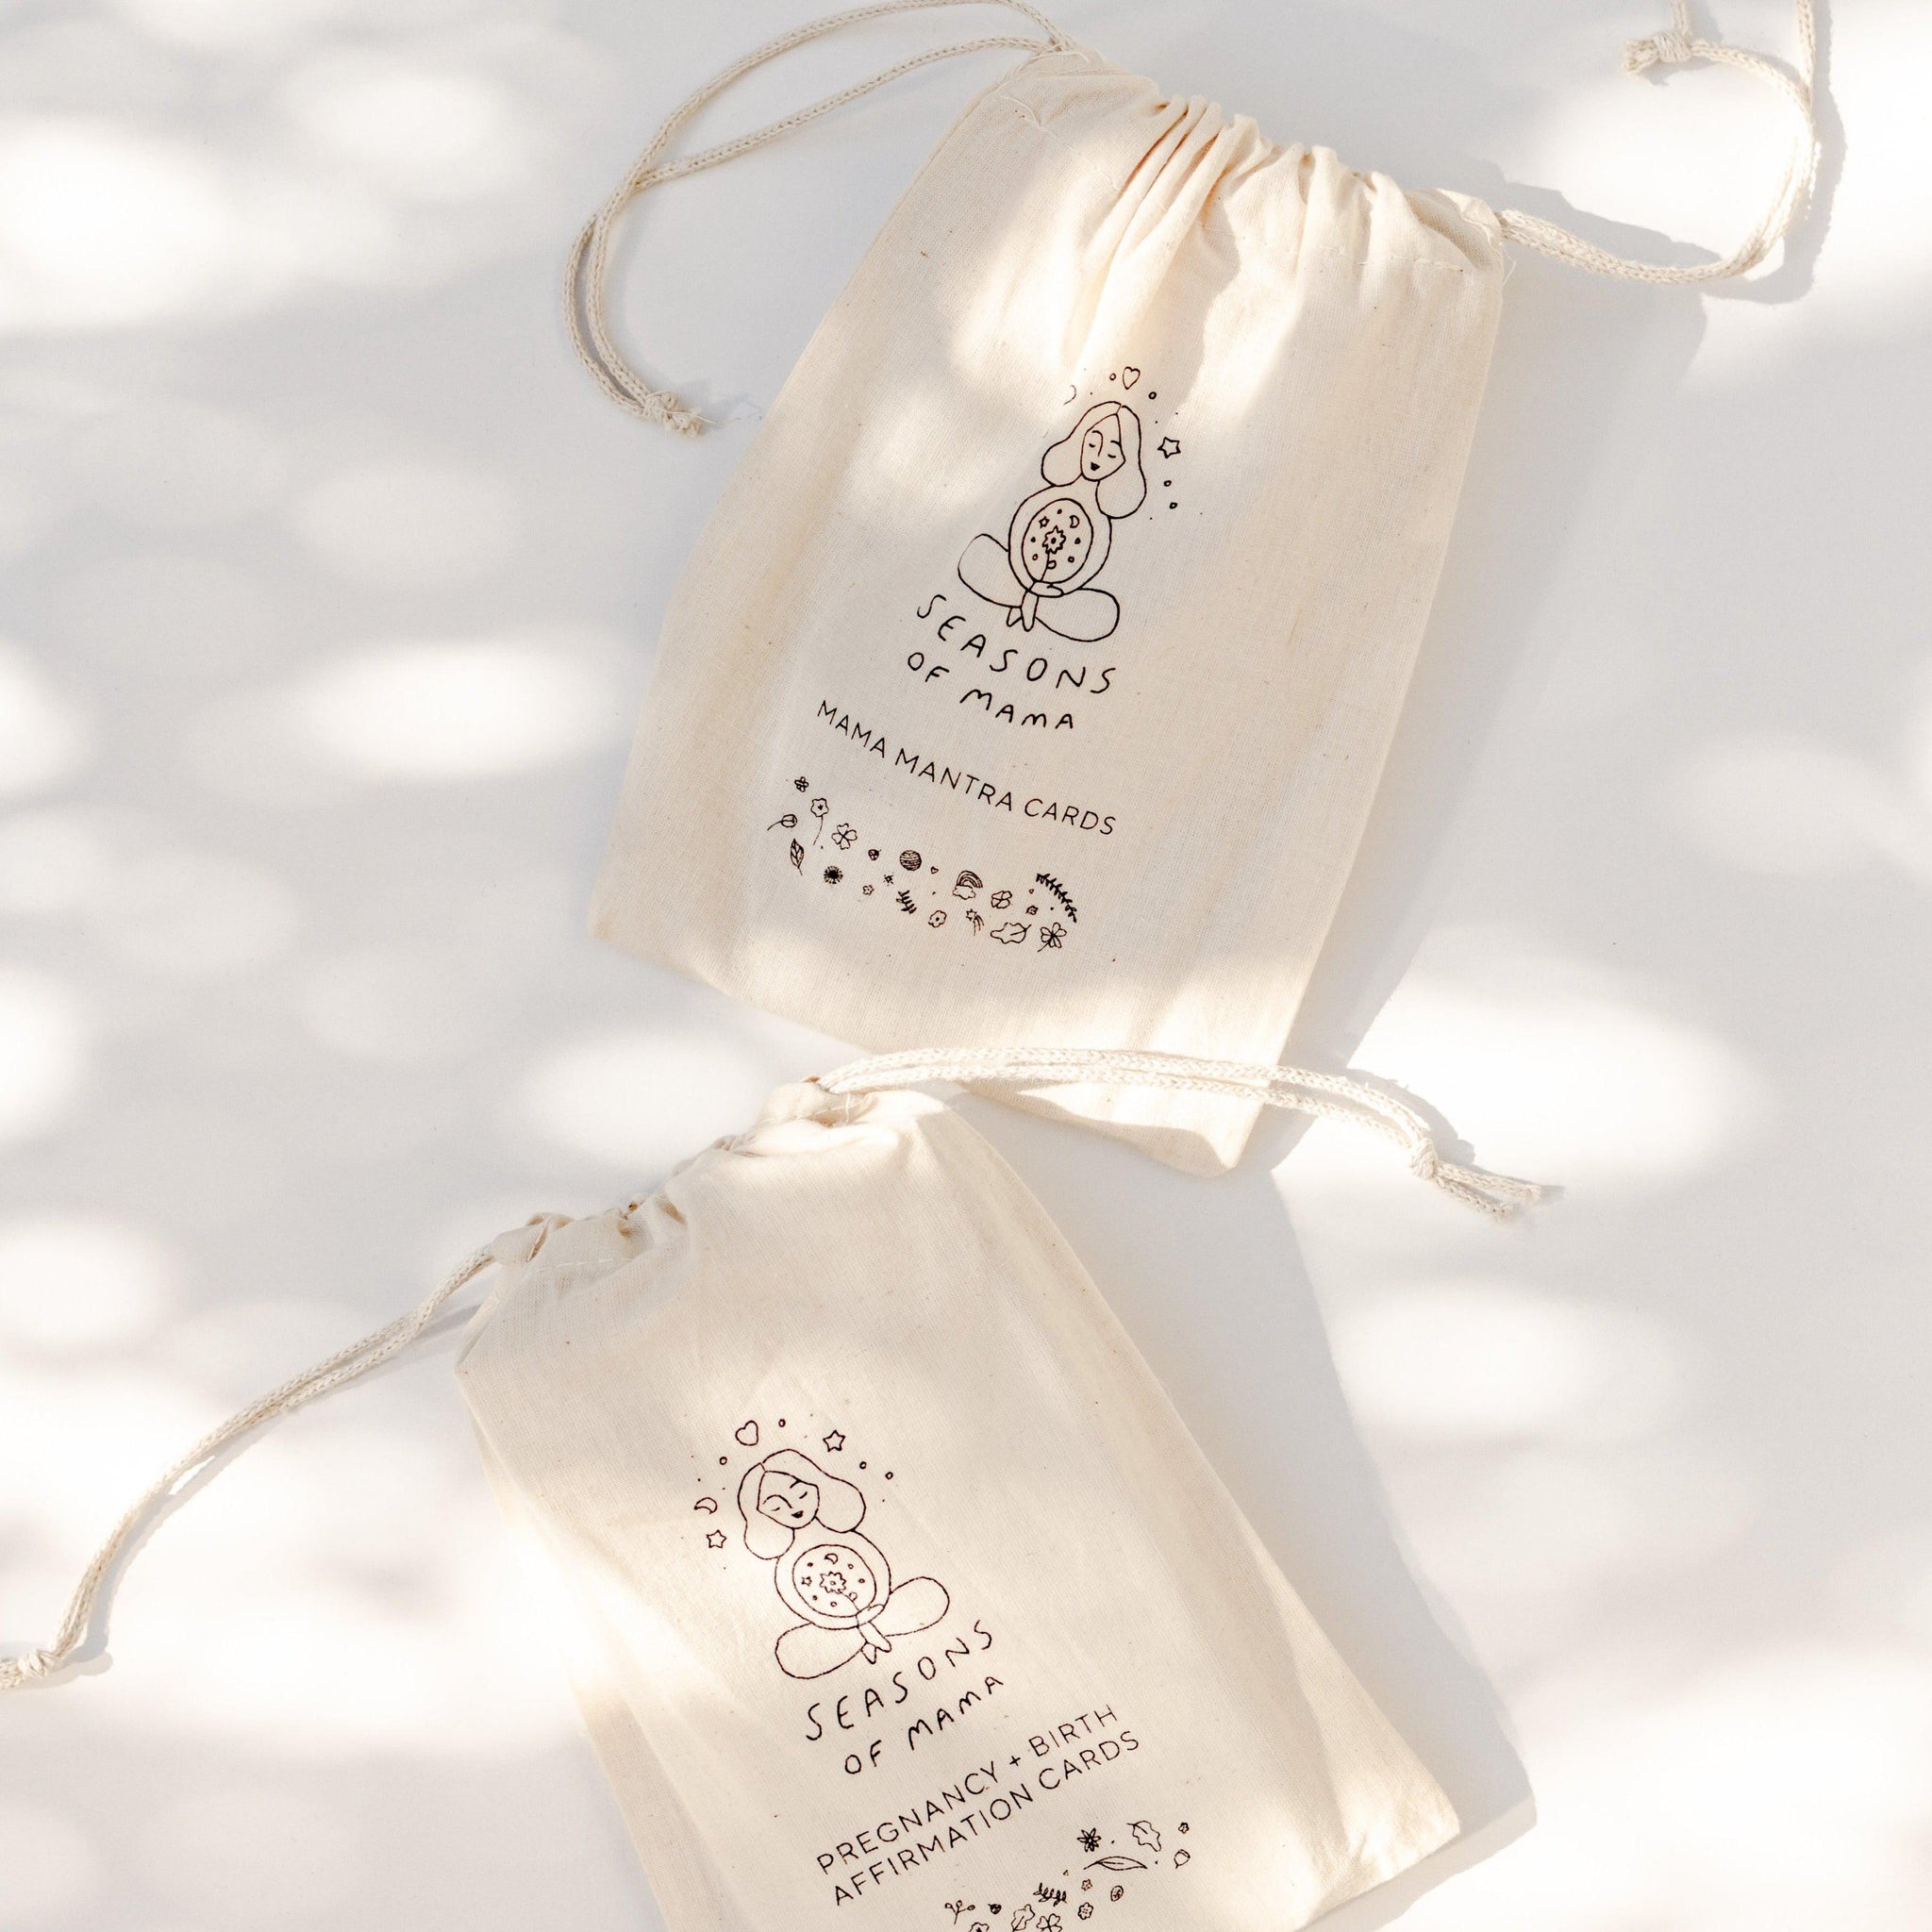 Two branded calico bags featuring Mama Mantra Cards and Pregnancy and Birth Affirmation Cards from Seasons of Mama.